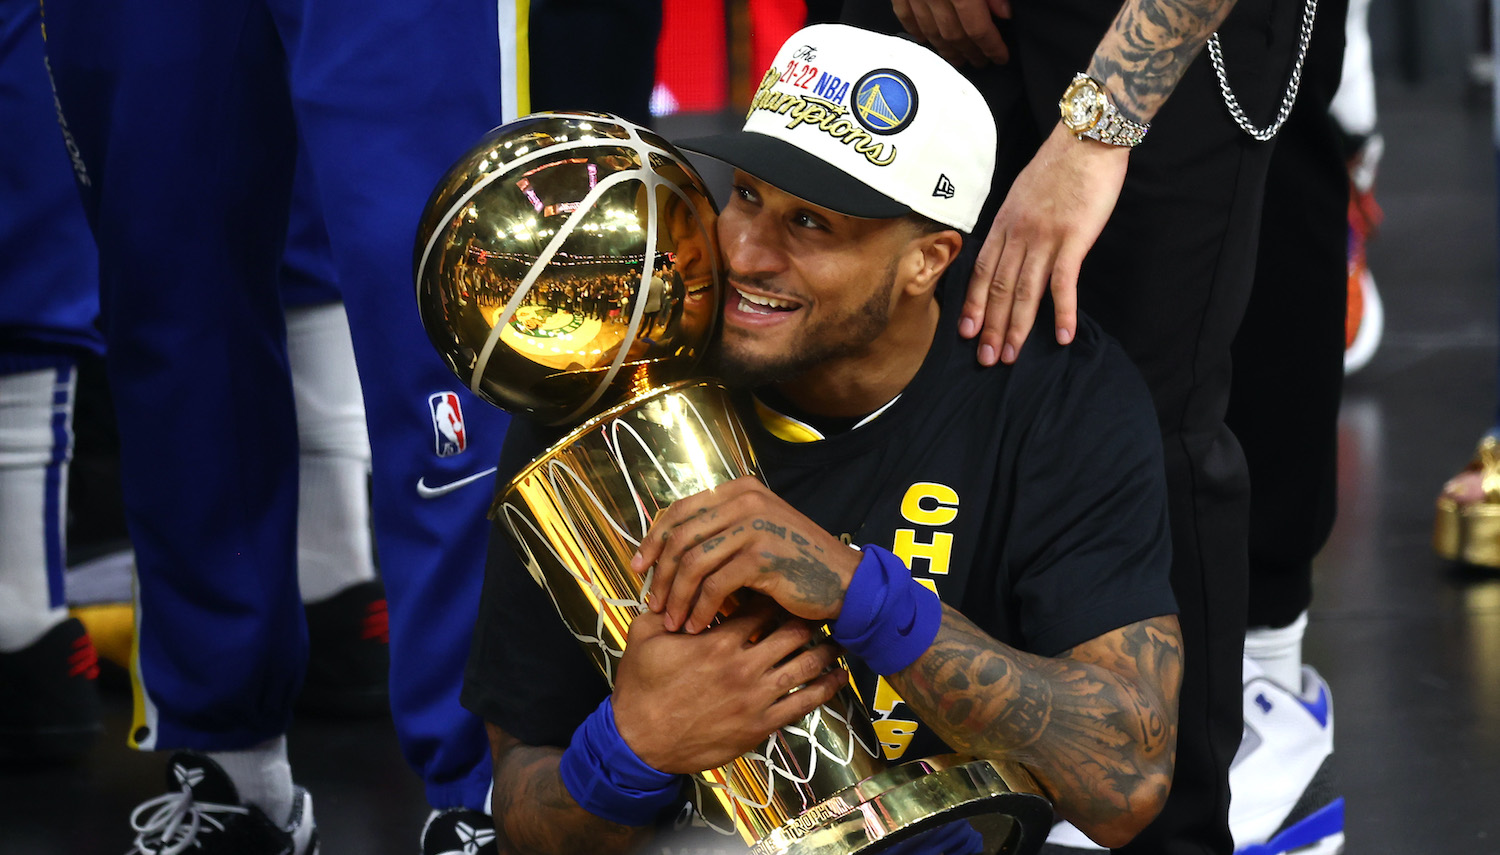 BOSTON, MASSACHUSETTS - JUNE 16: Gary Payton II #0 of the Golden State Warriors celebrates with the Larry O'Brien Championship Trophy after defeating the Boston Celtics 103-90 in Game Six of the 2022 NBA Finals at TD Garden on June 16, 2022 in Boston, Massachusetts. NOTE TO USER: User expressly acknowledges and agrees that, by downloading and/or using this photograph, User is consenting to the terms and conditions of the Getty Images License Agreement. (Photo by Adam Glanzman/Getty Images)